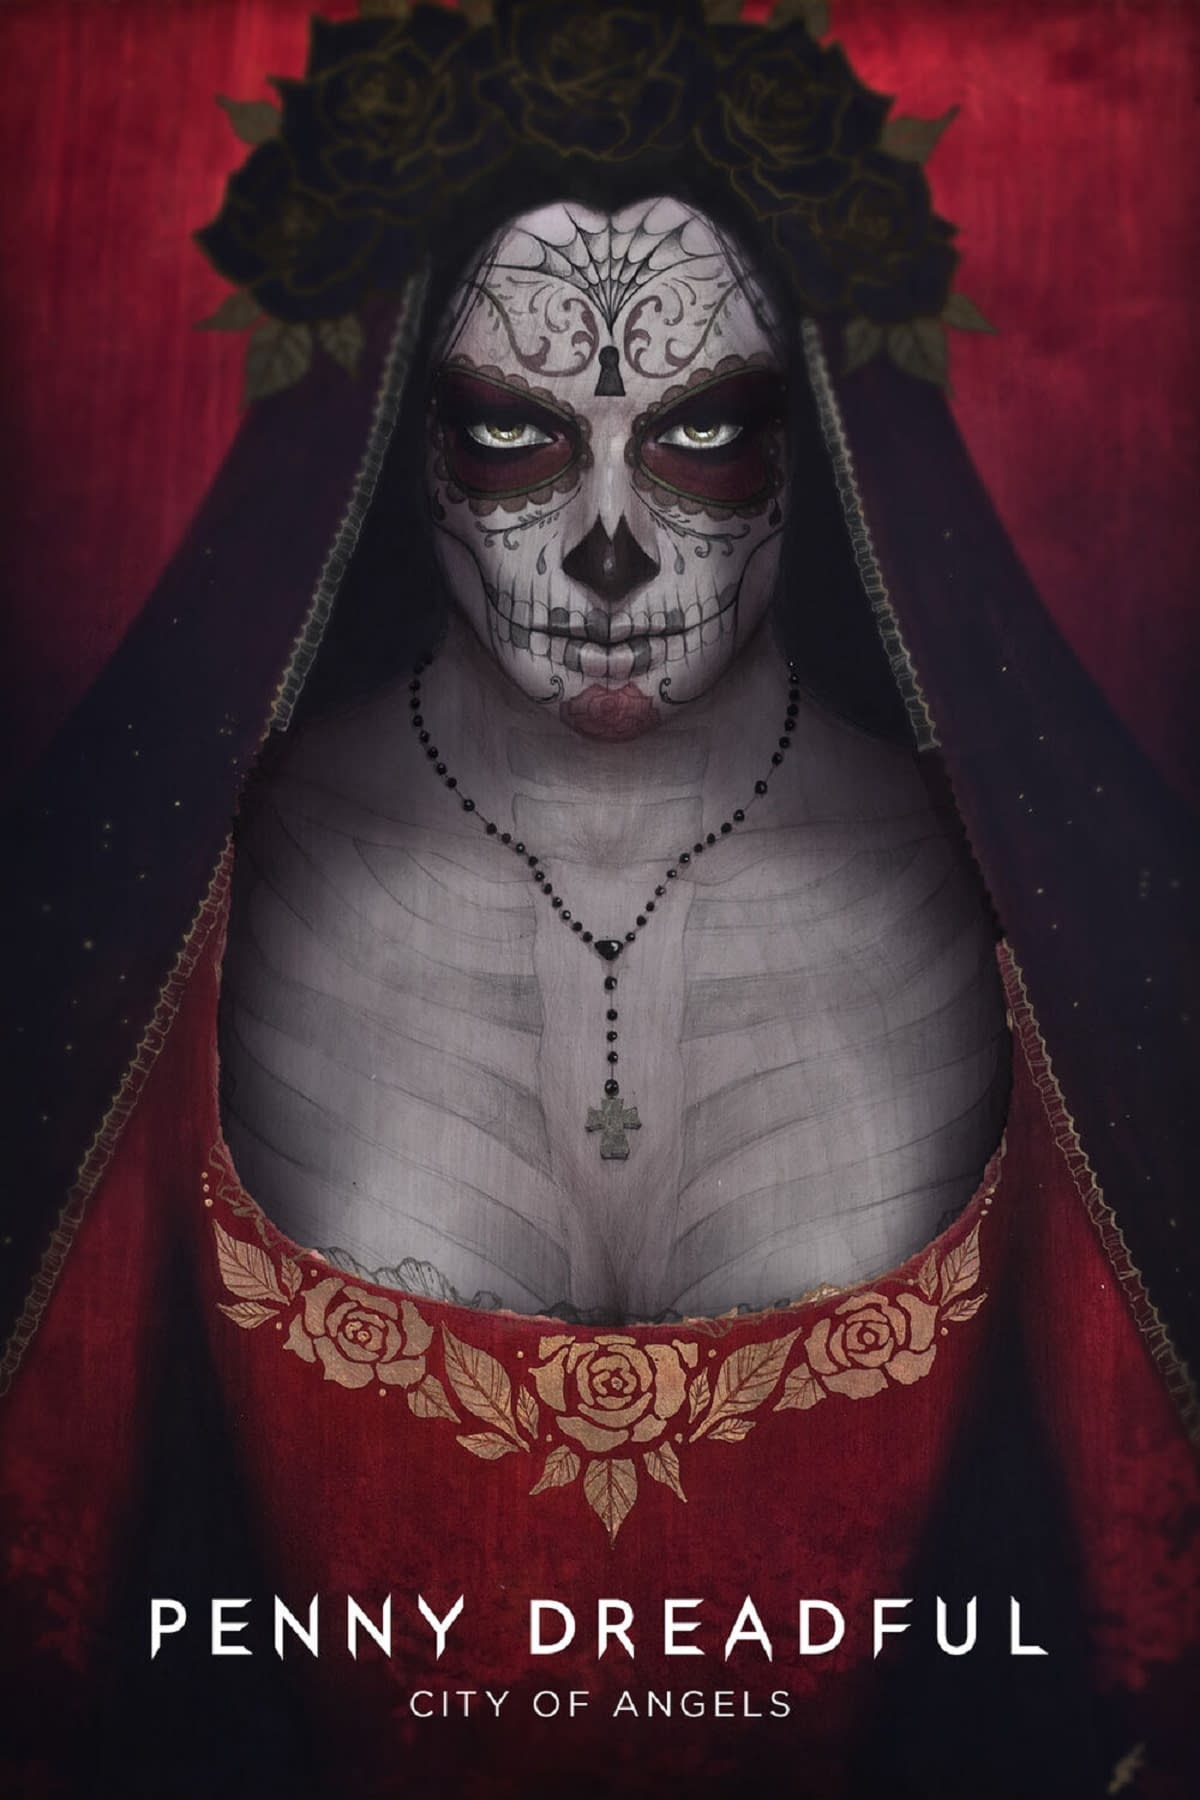 'Penny Dreadful: City of Angels' Adds to Spooky Cast for Showtime Series